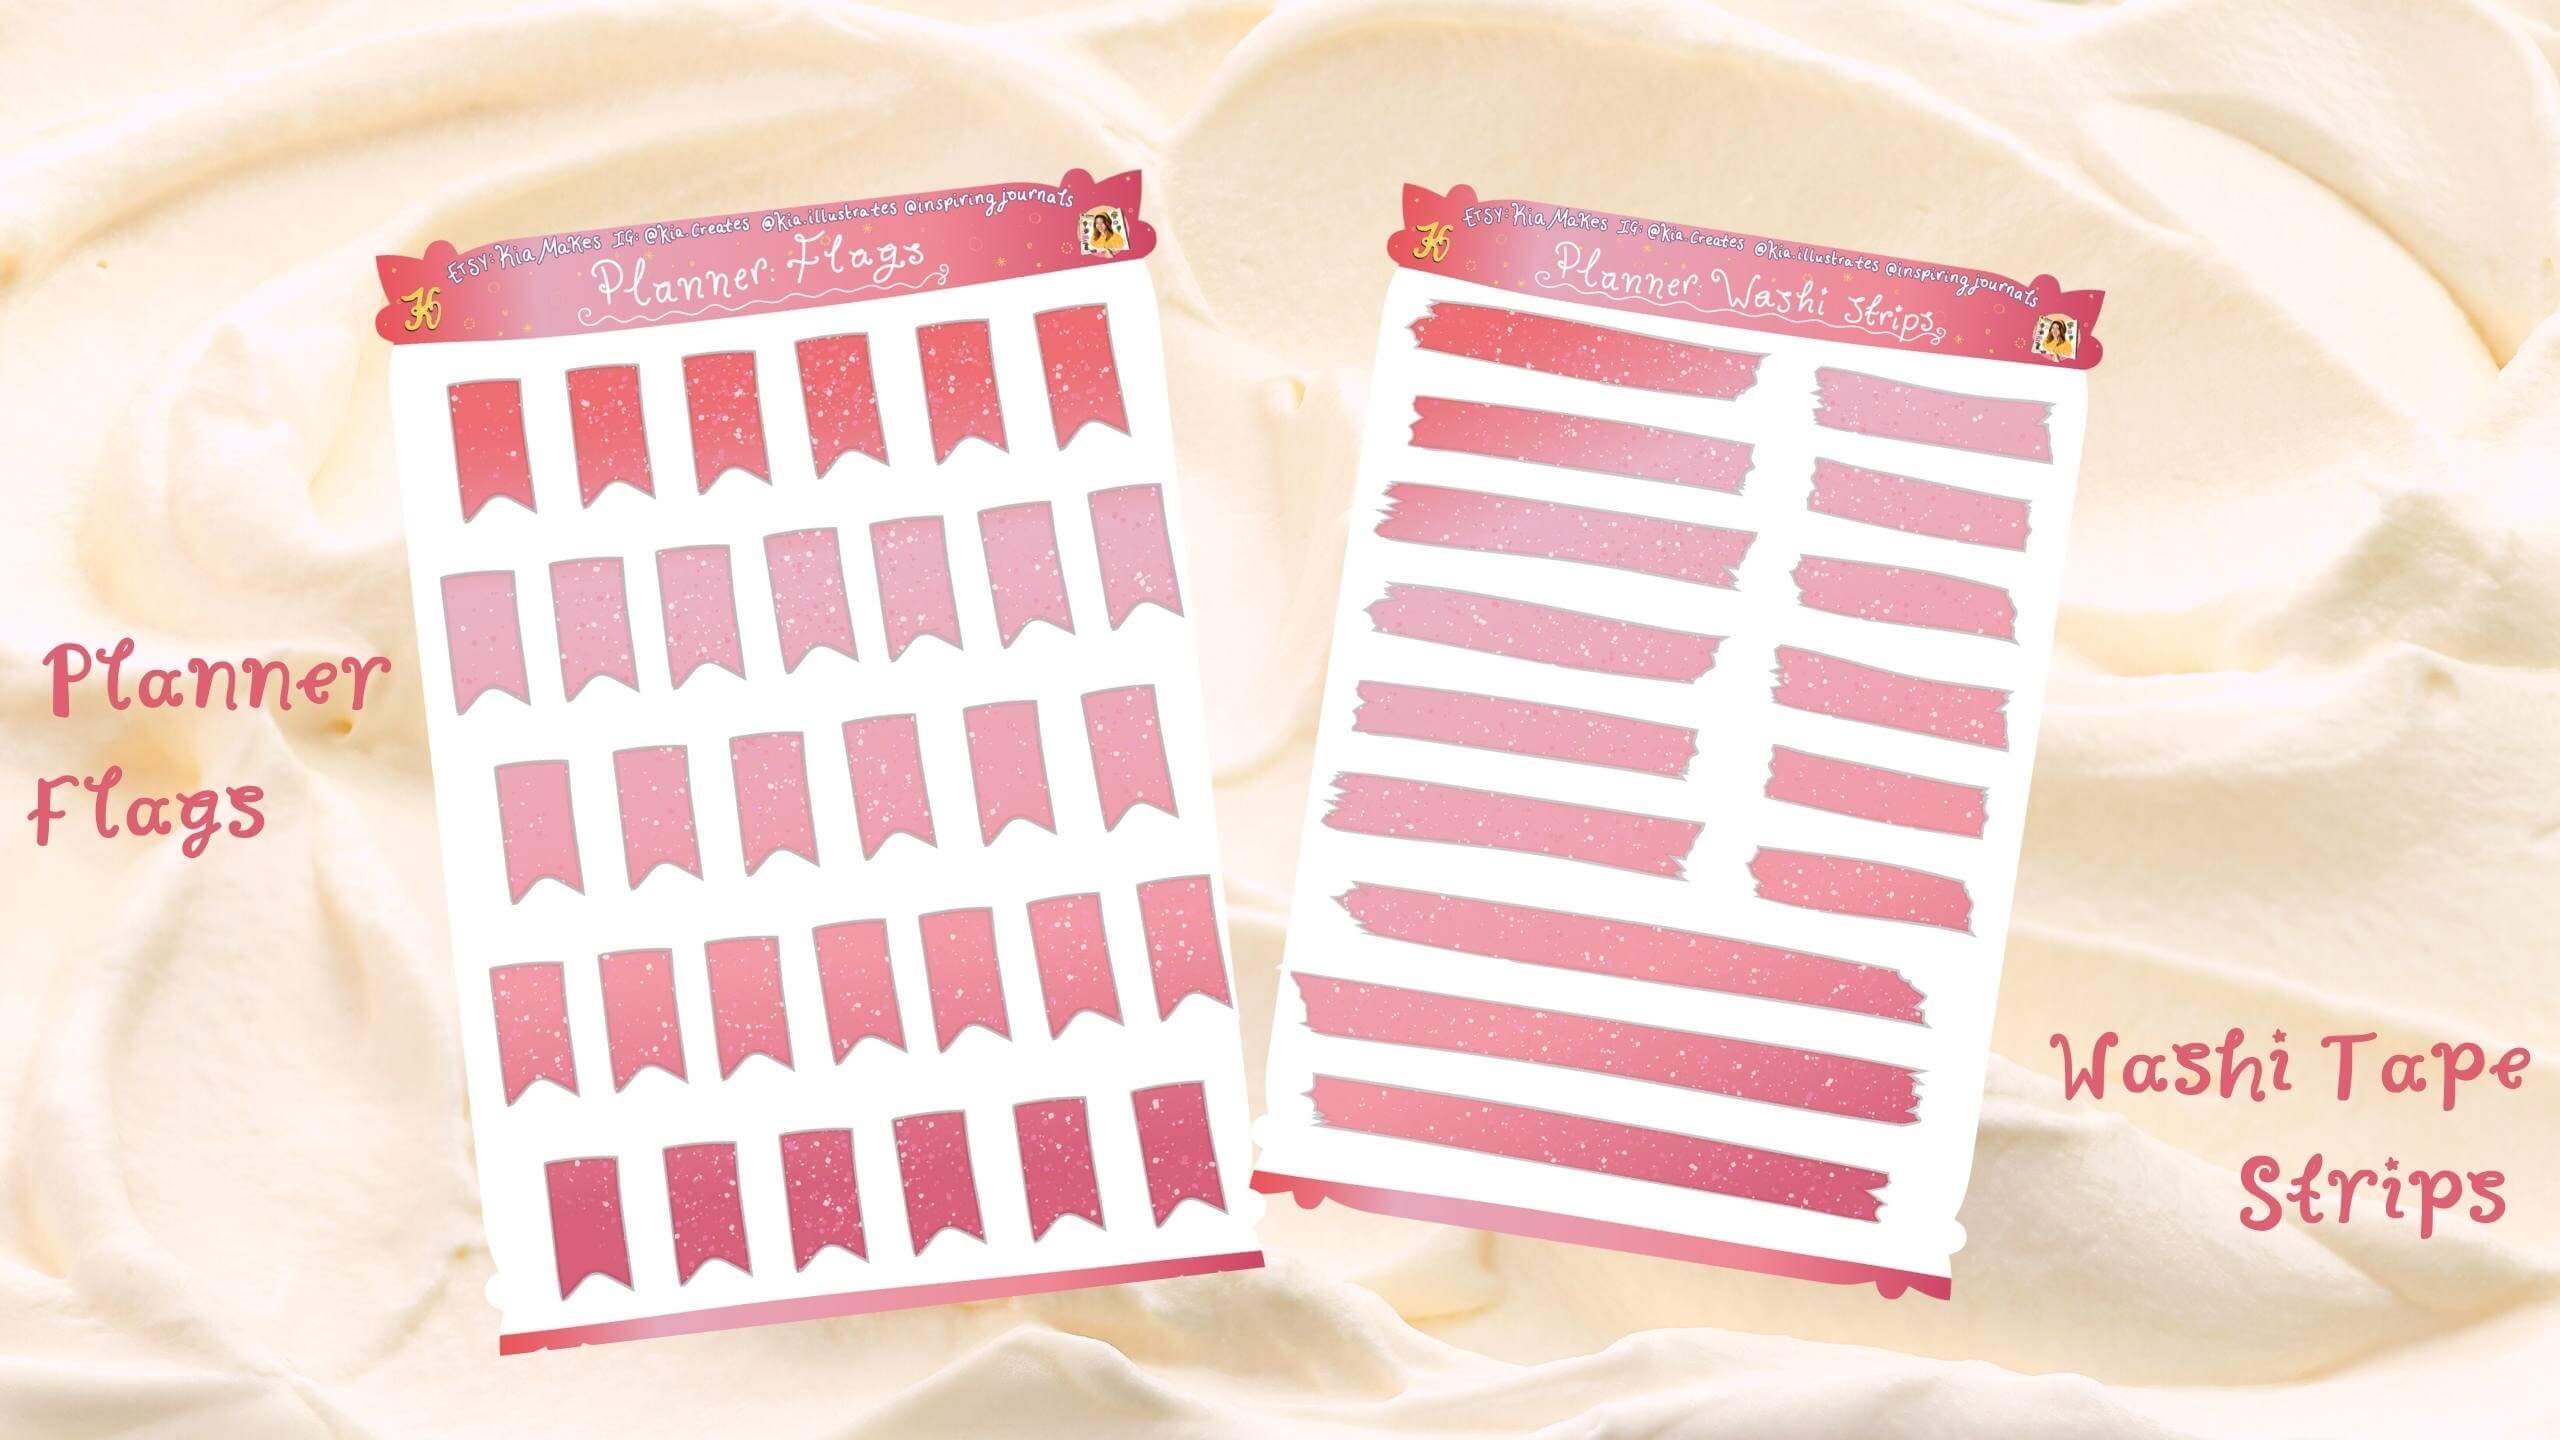 Planner stickers bundle - Strawberries and cream pink - flags and washi tape strips